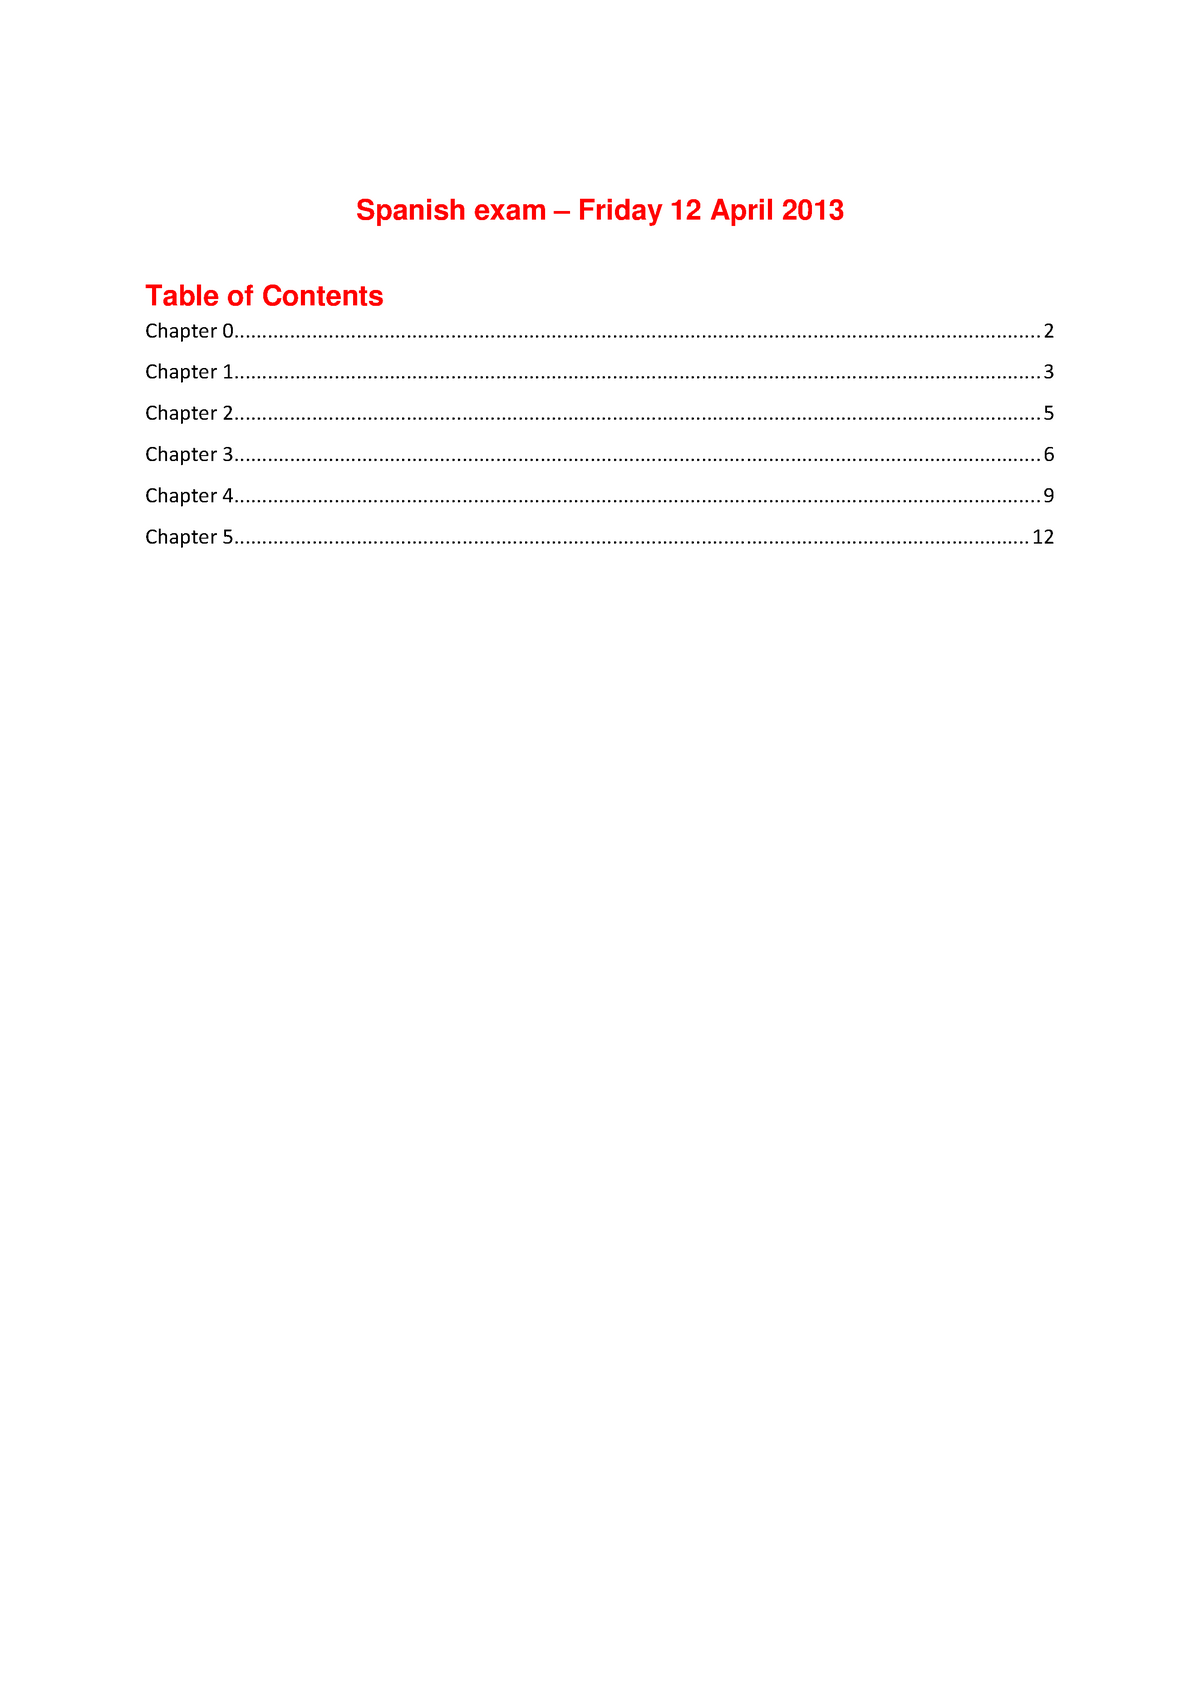 summary-spanish-1-chapter-1-5-table-of-contents-spanish-exam